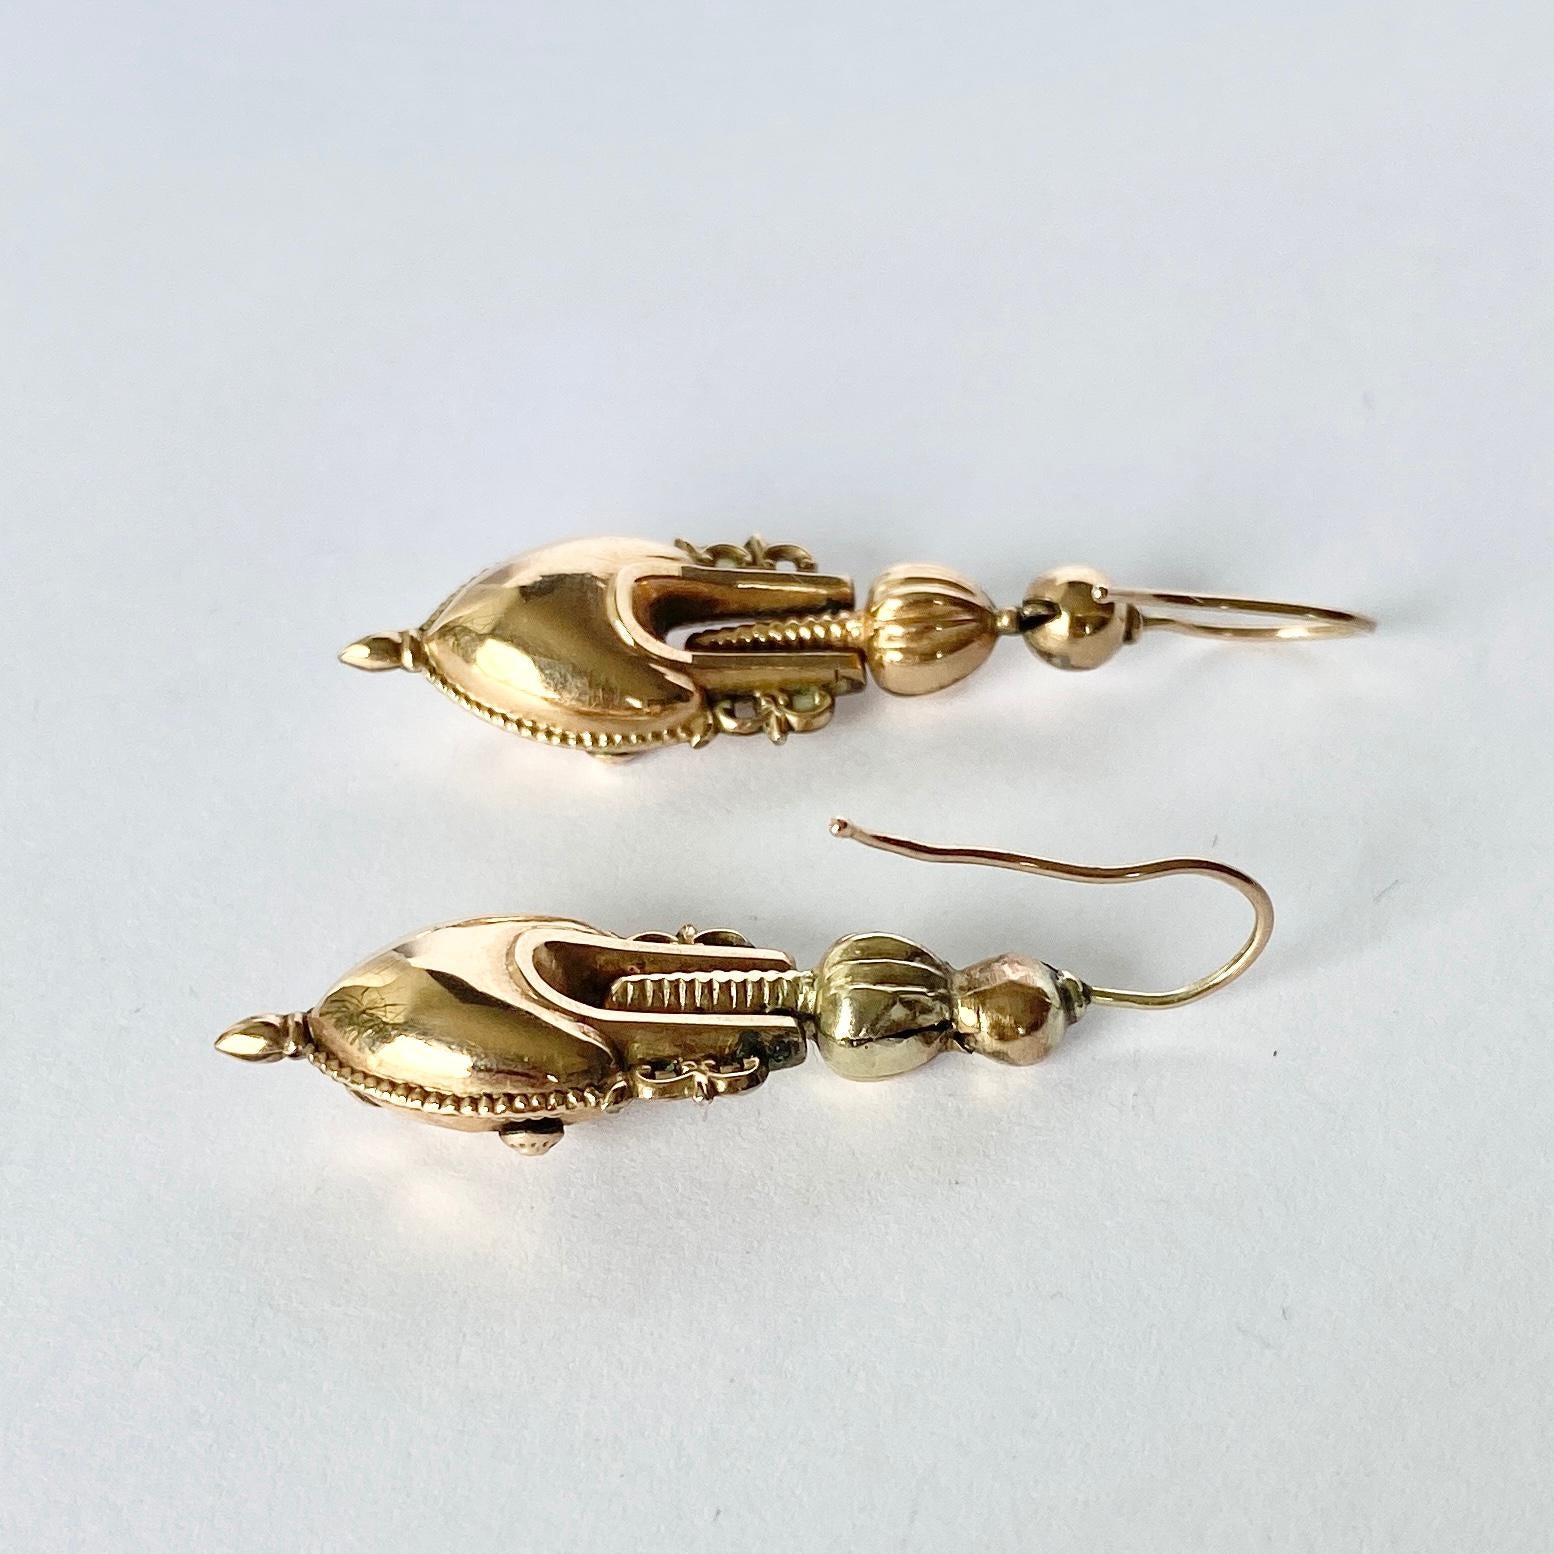 These stunning earrings have so much intricate detail on them and are amphora shape. They are in great condition. Modelled in 9ct gold. 

Drop from ear: 4cm 

Weight: 3.1g